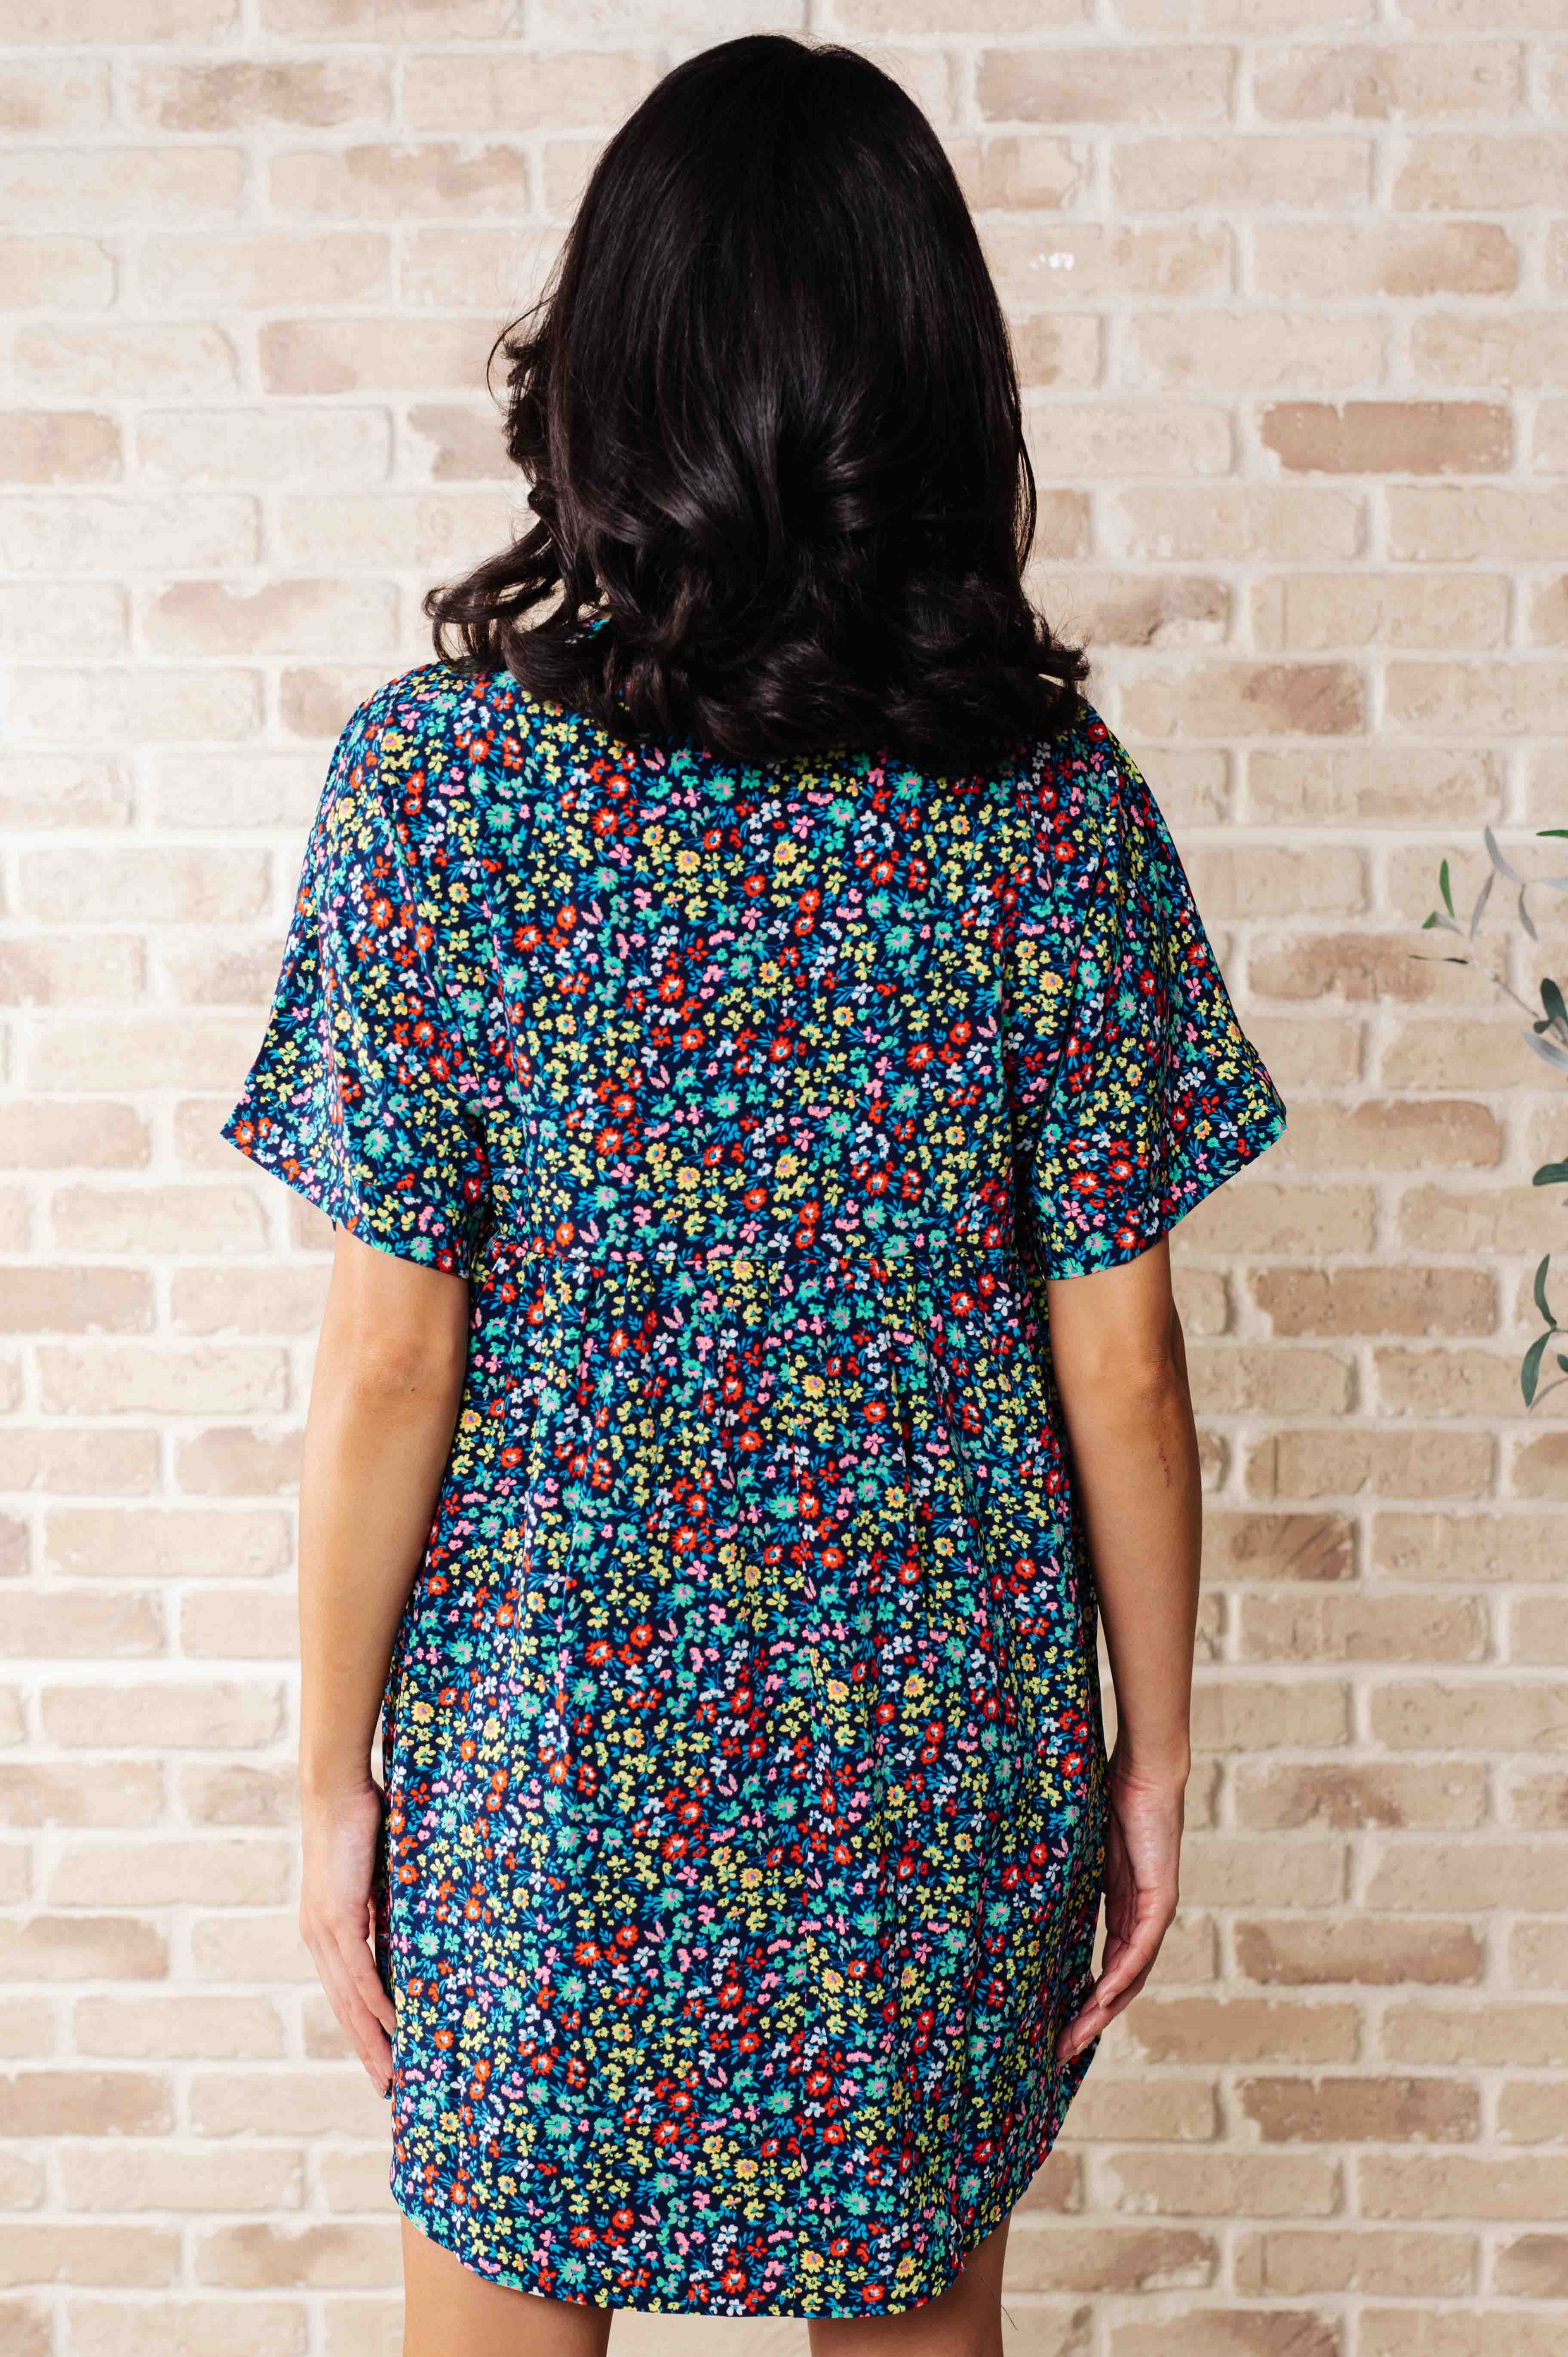 Emily Wonder What's the Hurry About? Floral Dress Ave Shops